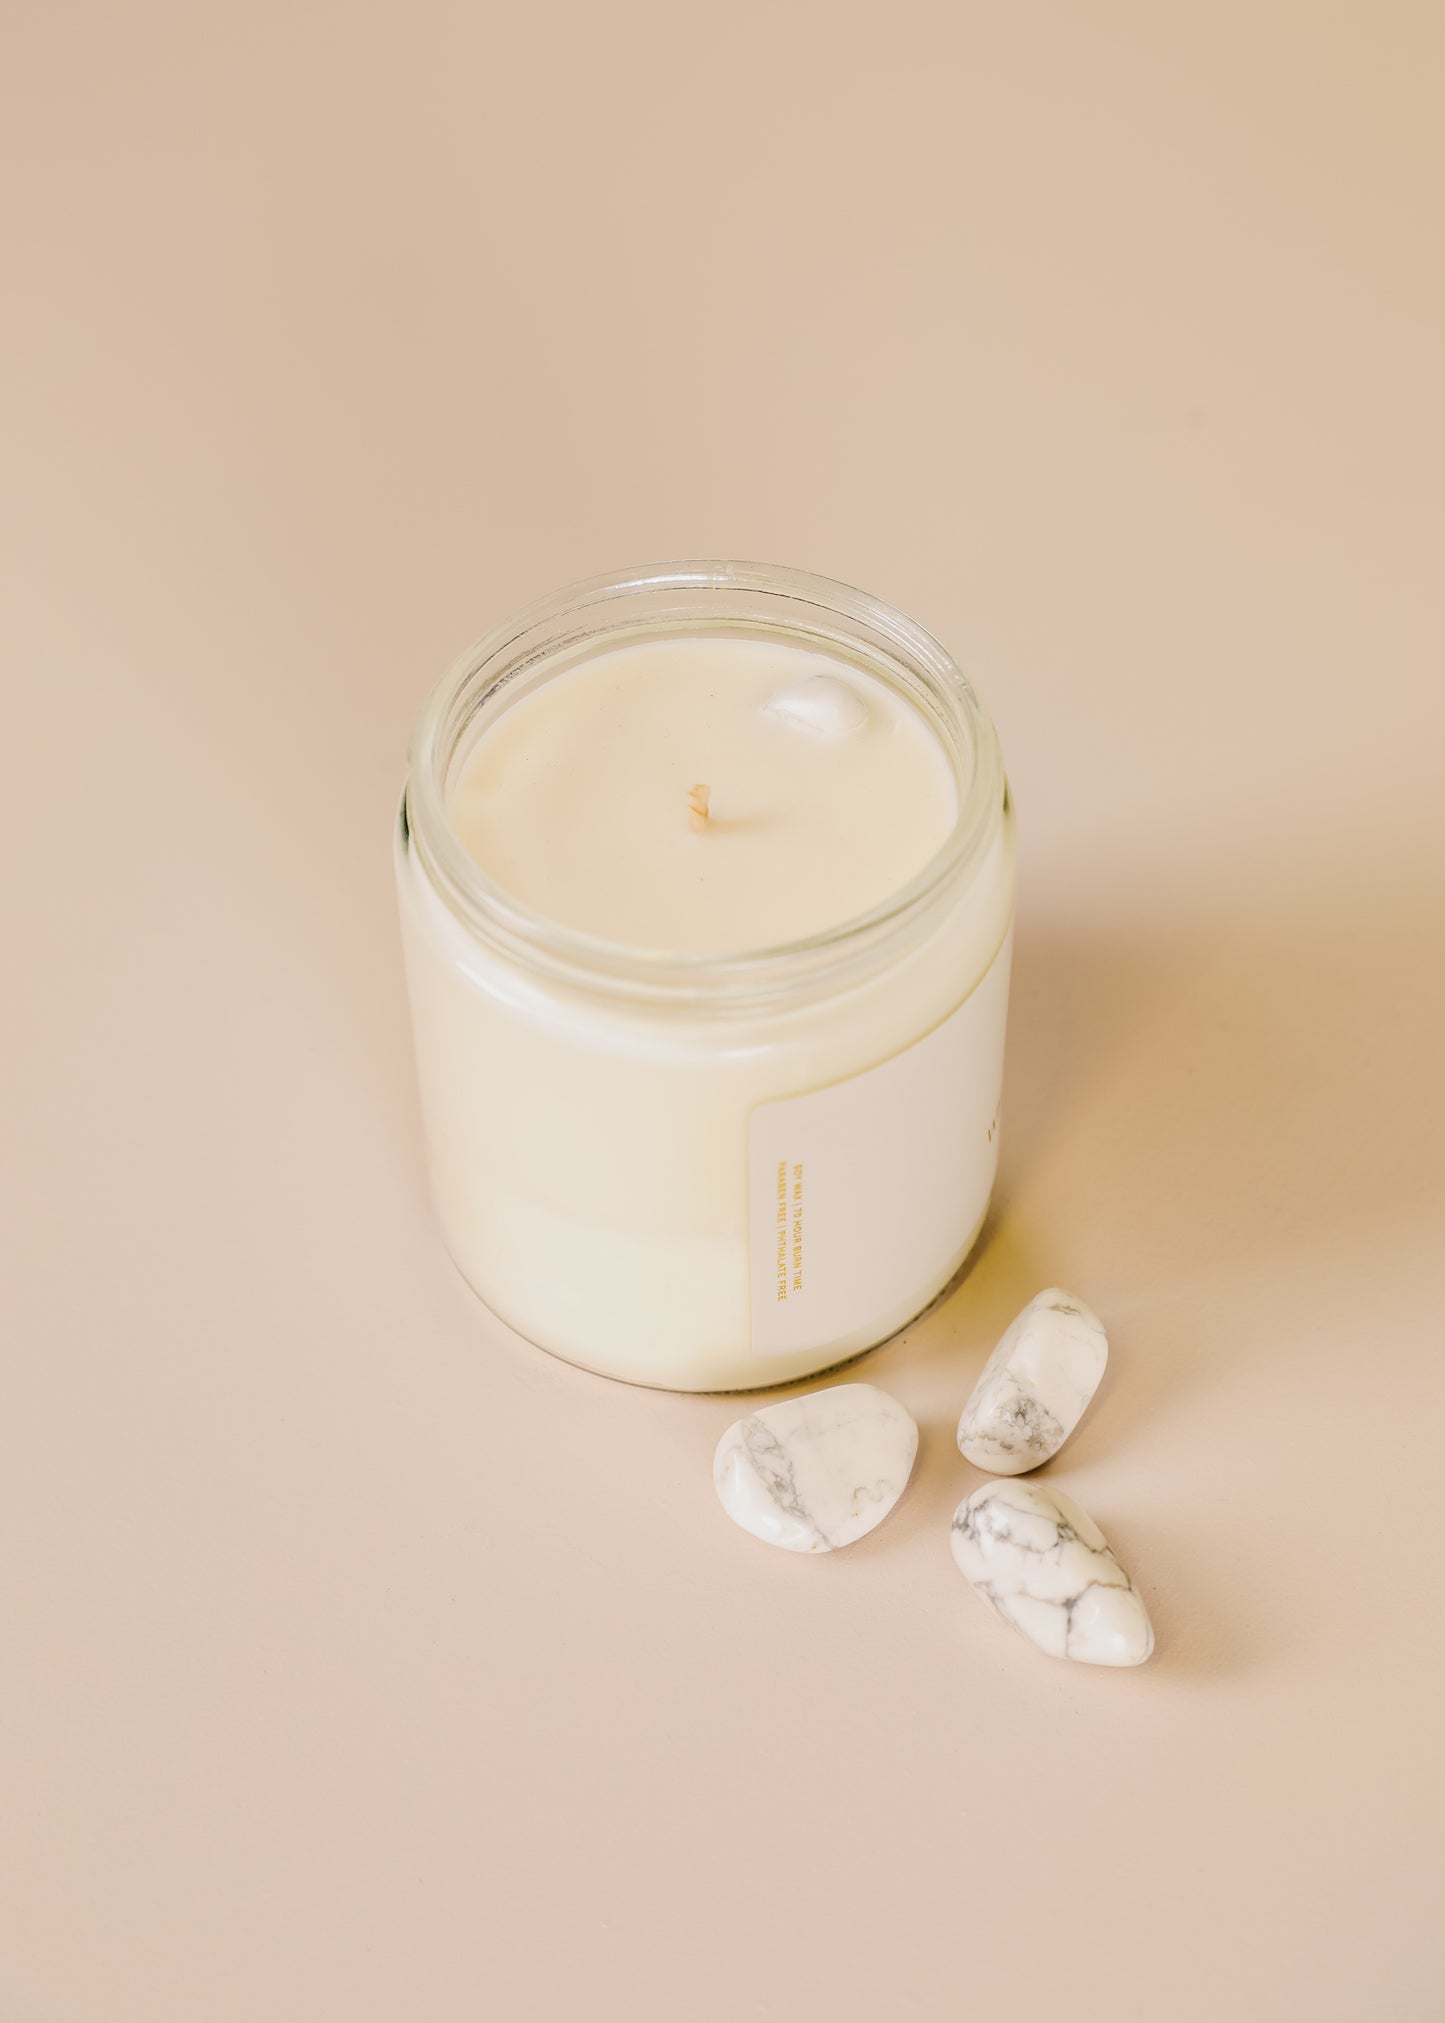 16oz Clear Crystal Candle - White Howlite - Mindfulness